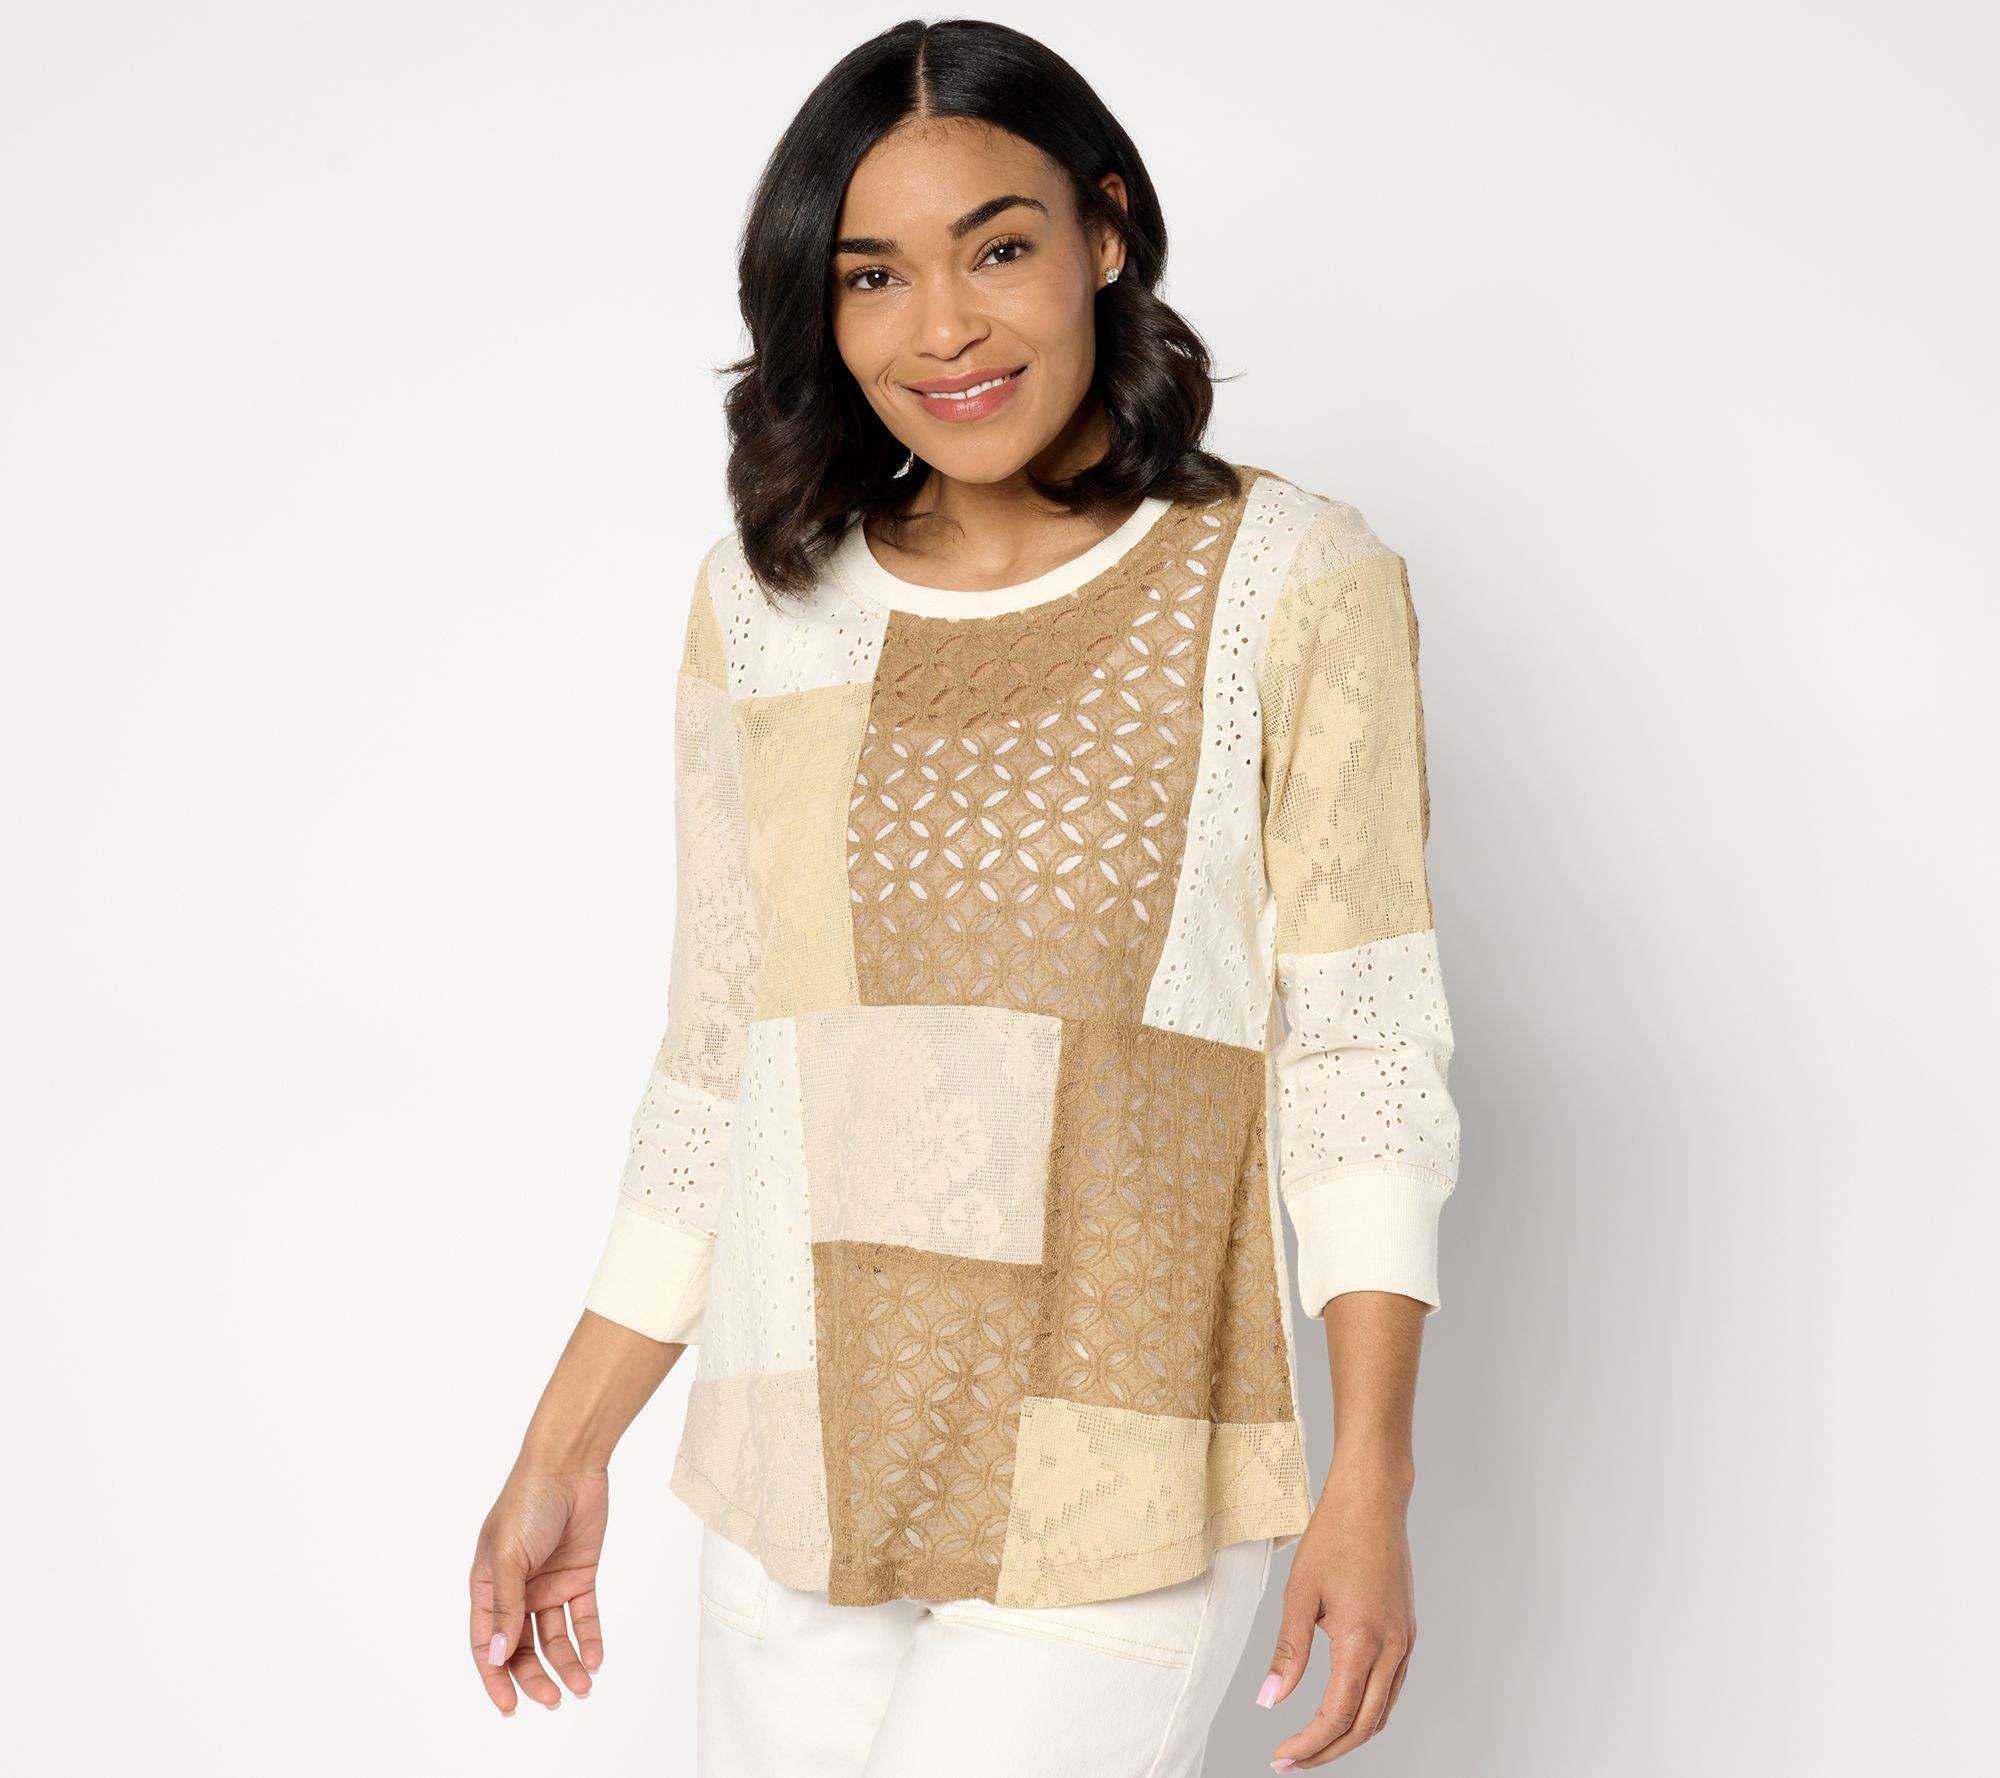 LOGO Lavish by Lori Goldstein Mixed Patchwork 3/4 Sleeve Lace Top - QVC.com